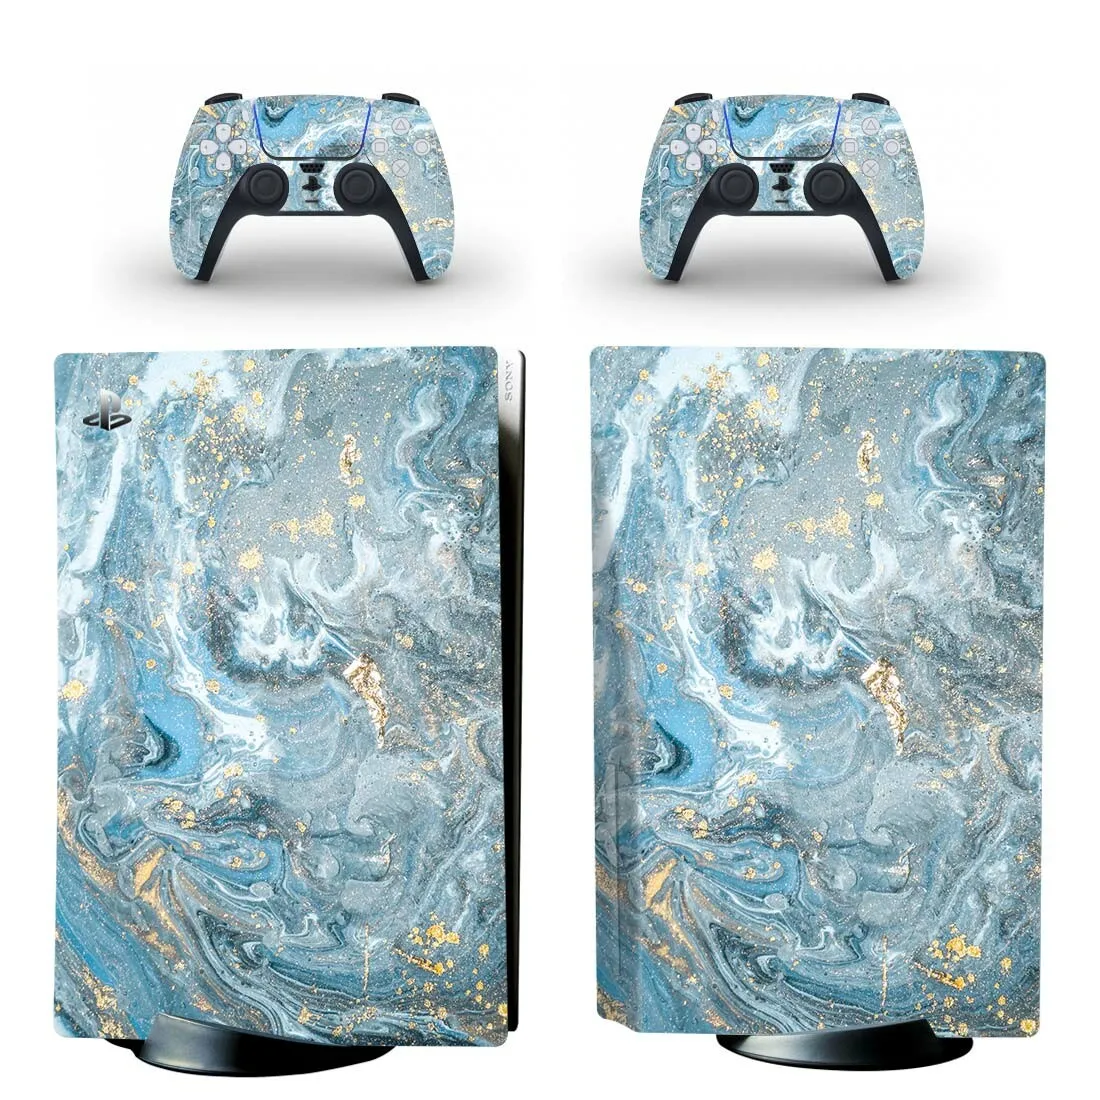 

Marble Stone PS5 Disc Skin Sticker Cover for Playstation 5 Console & 2 Controllers Decal Vinyl Protective Disk Skins